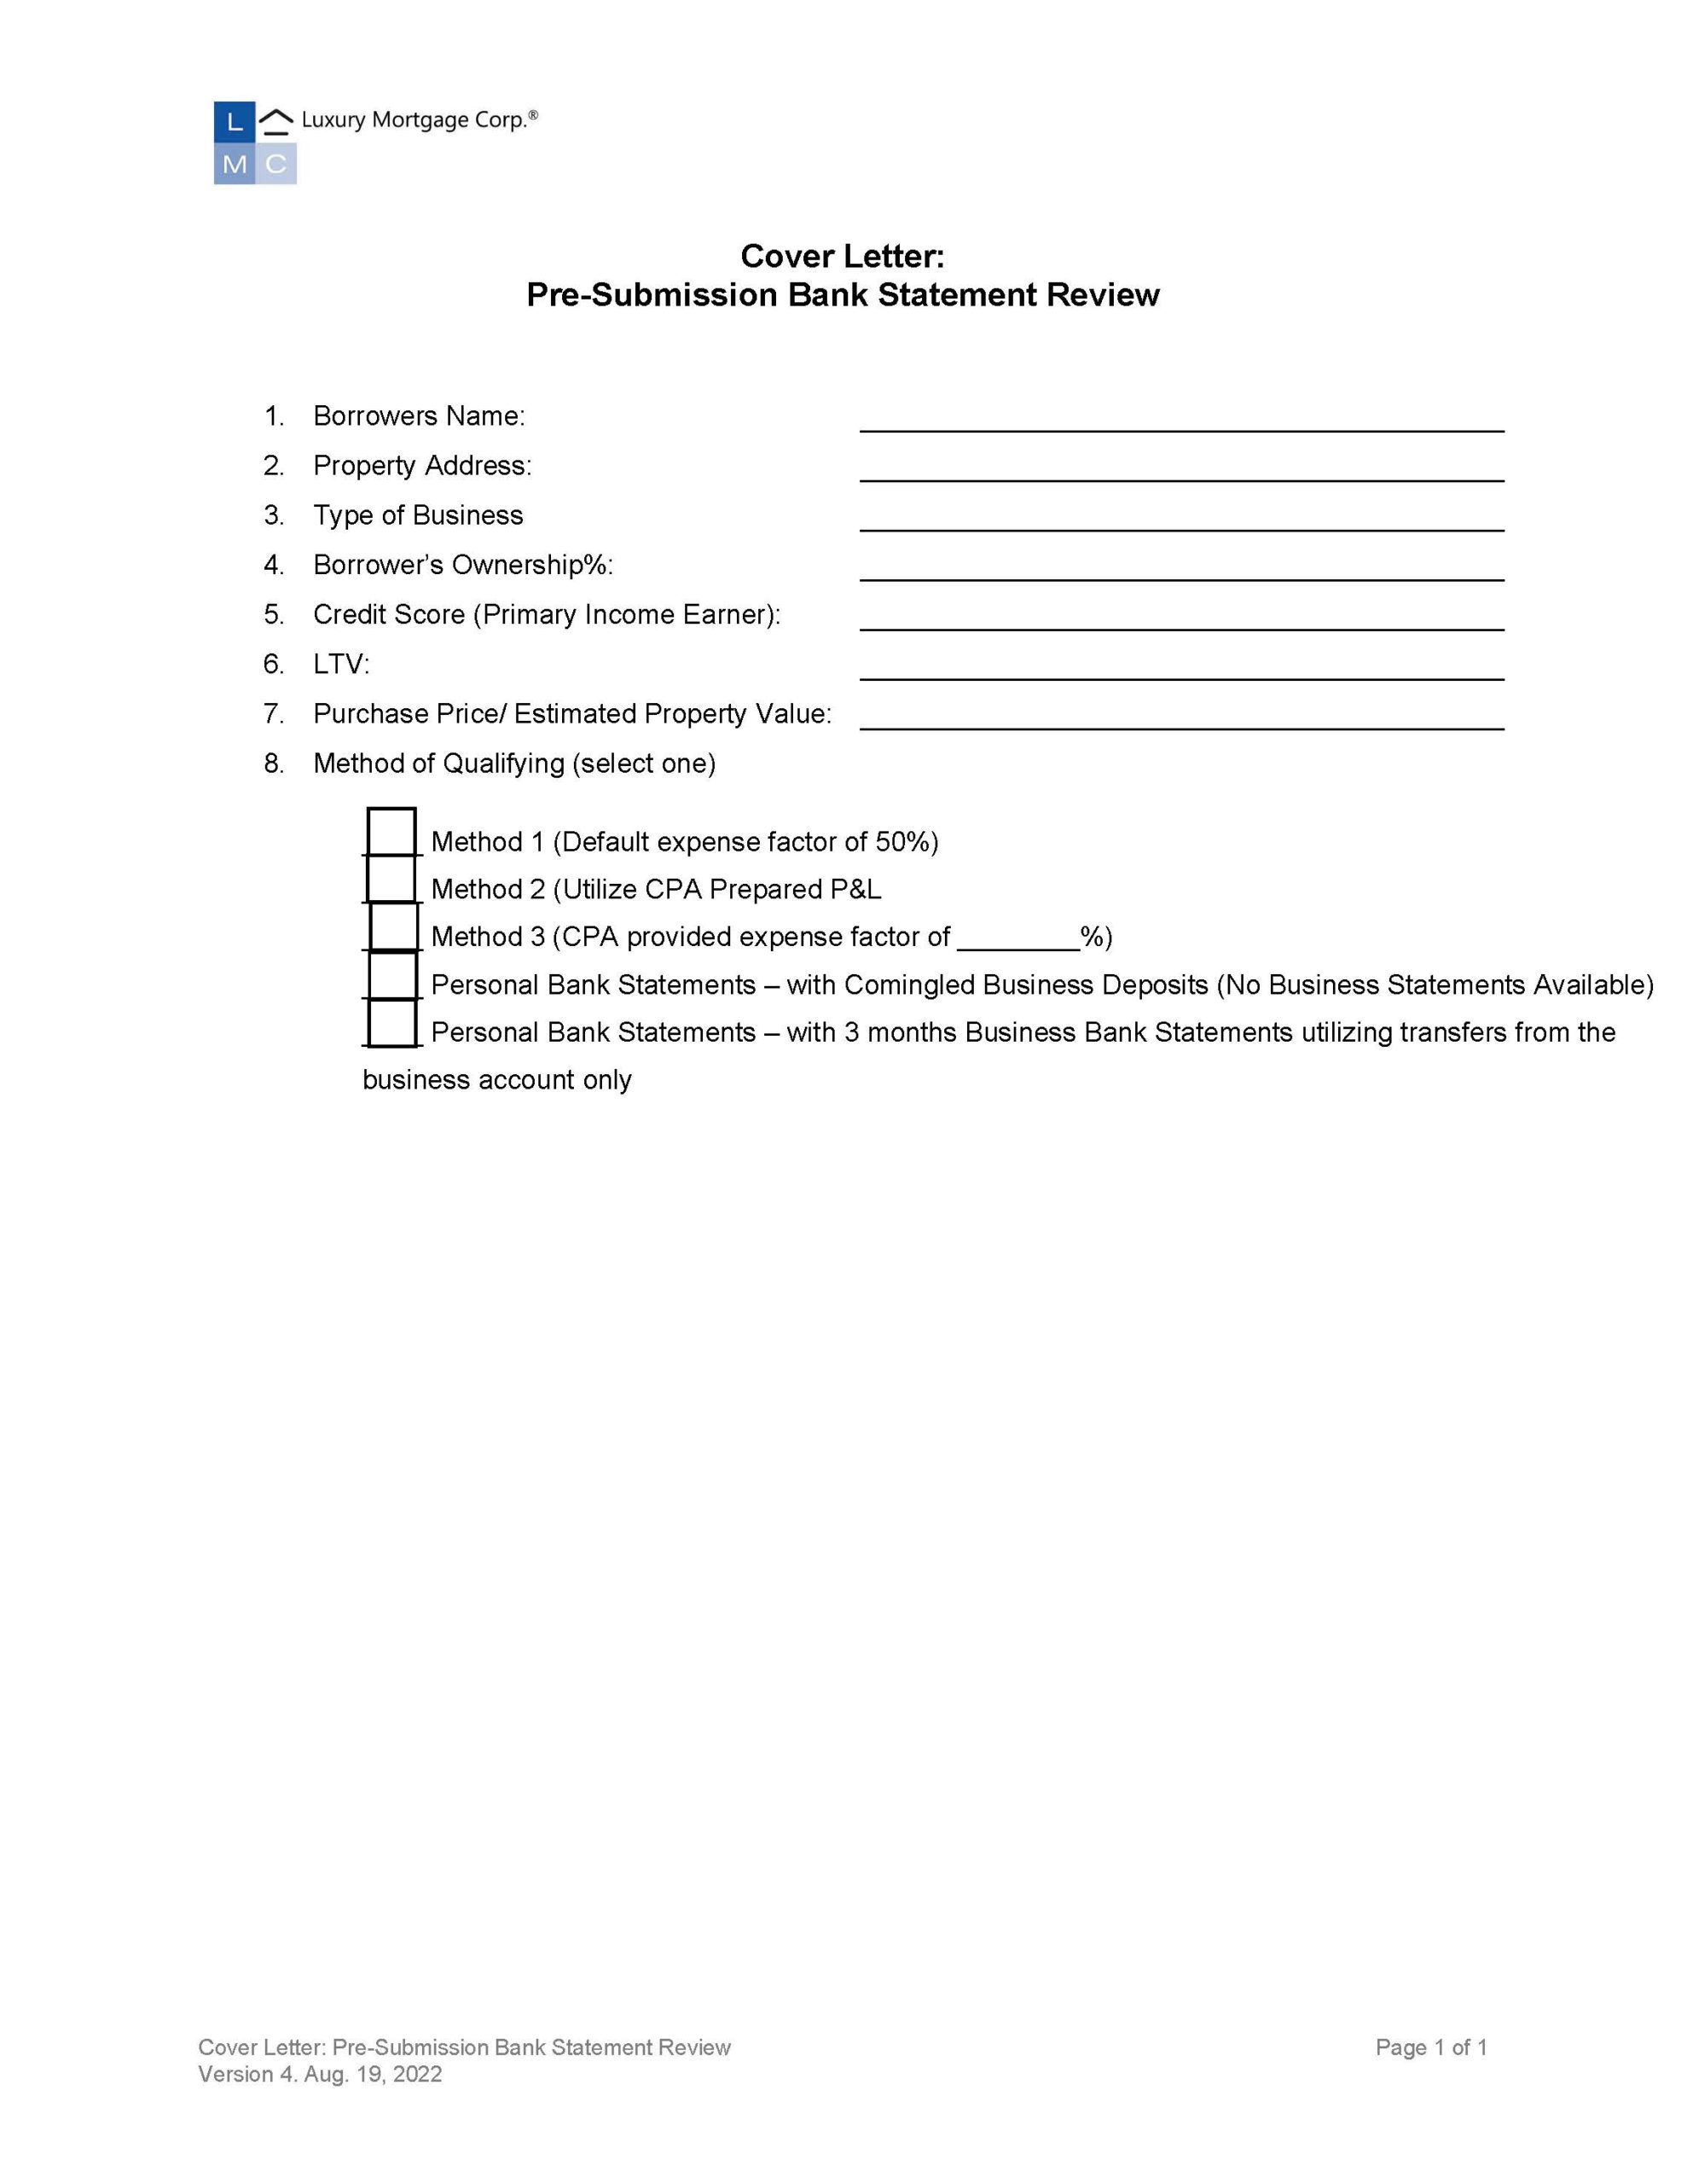 Cover Letter Pre-Submission Bank Statement Review v.4